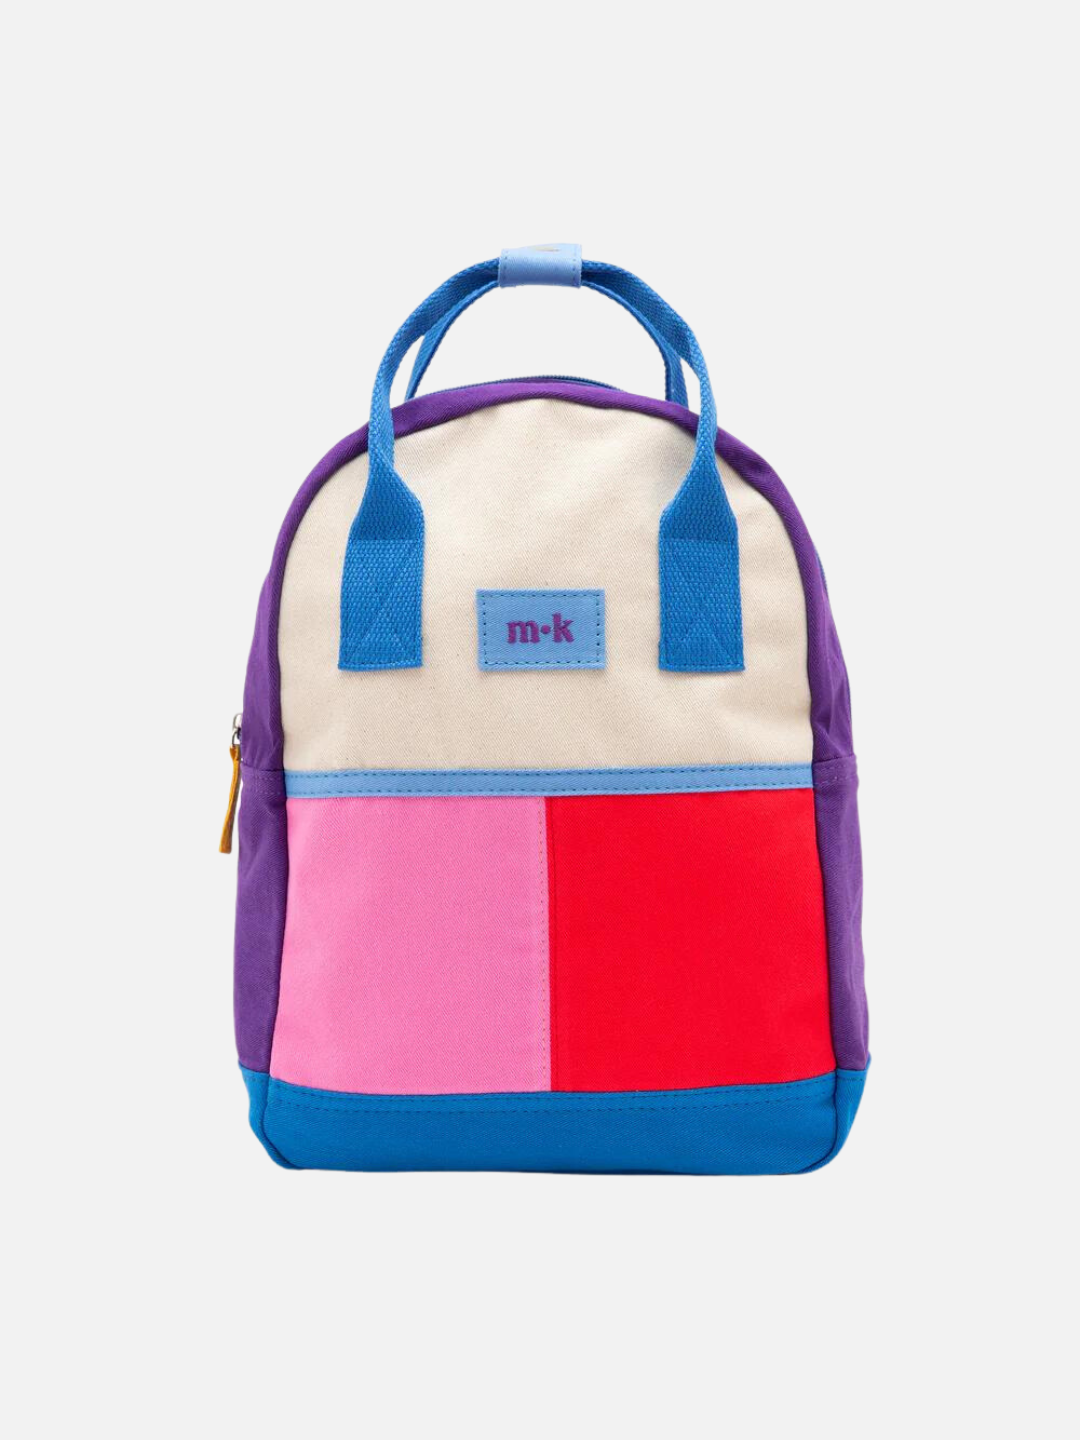 A colorblock backpack with bright blue handles and base, purple sides and one pink and one red patch under a cream top